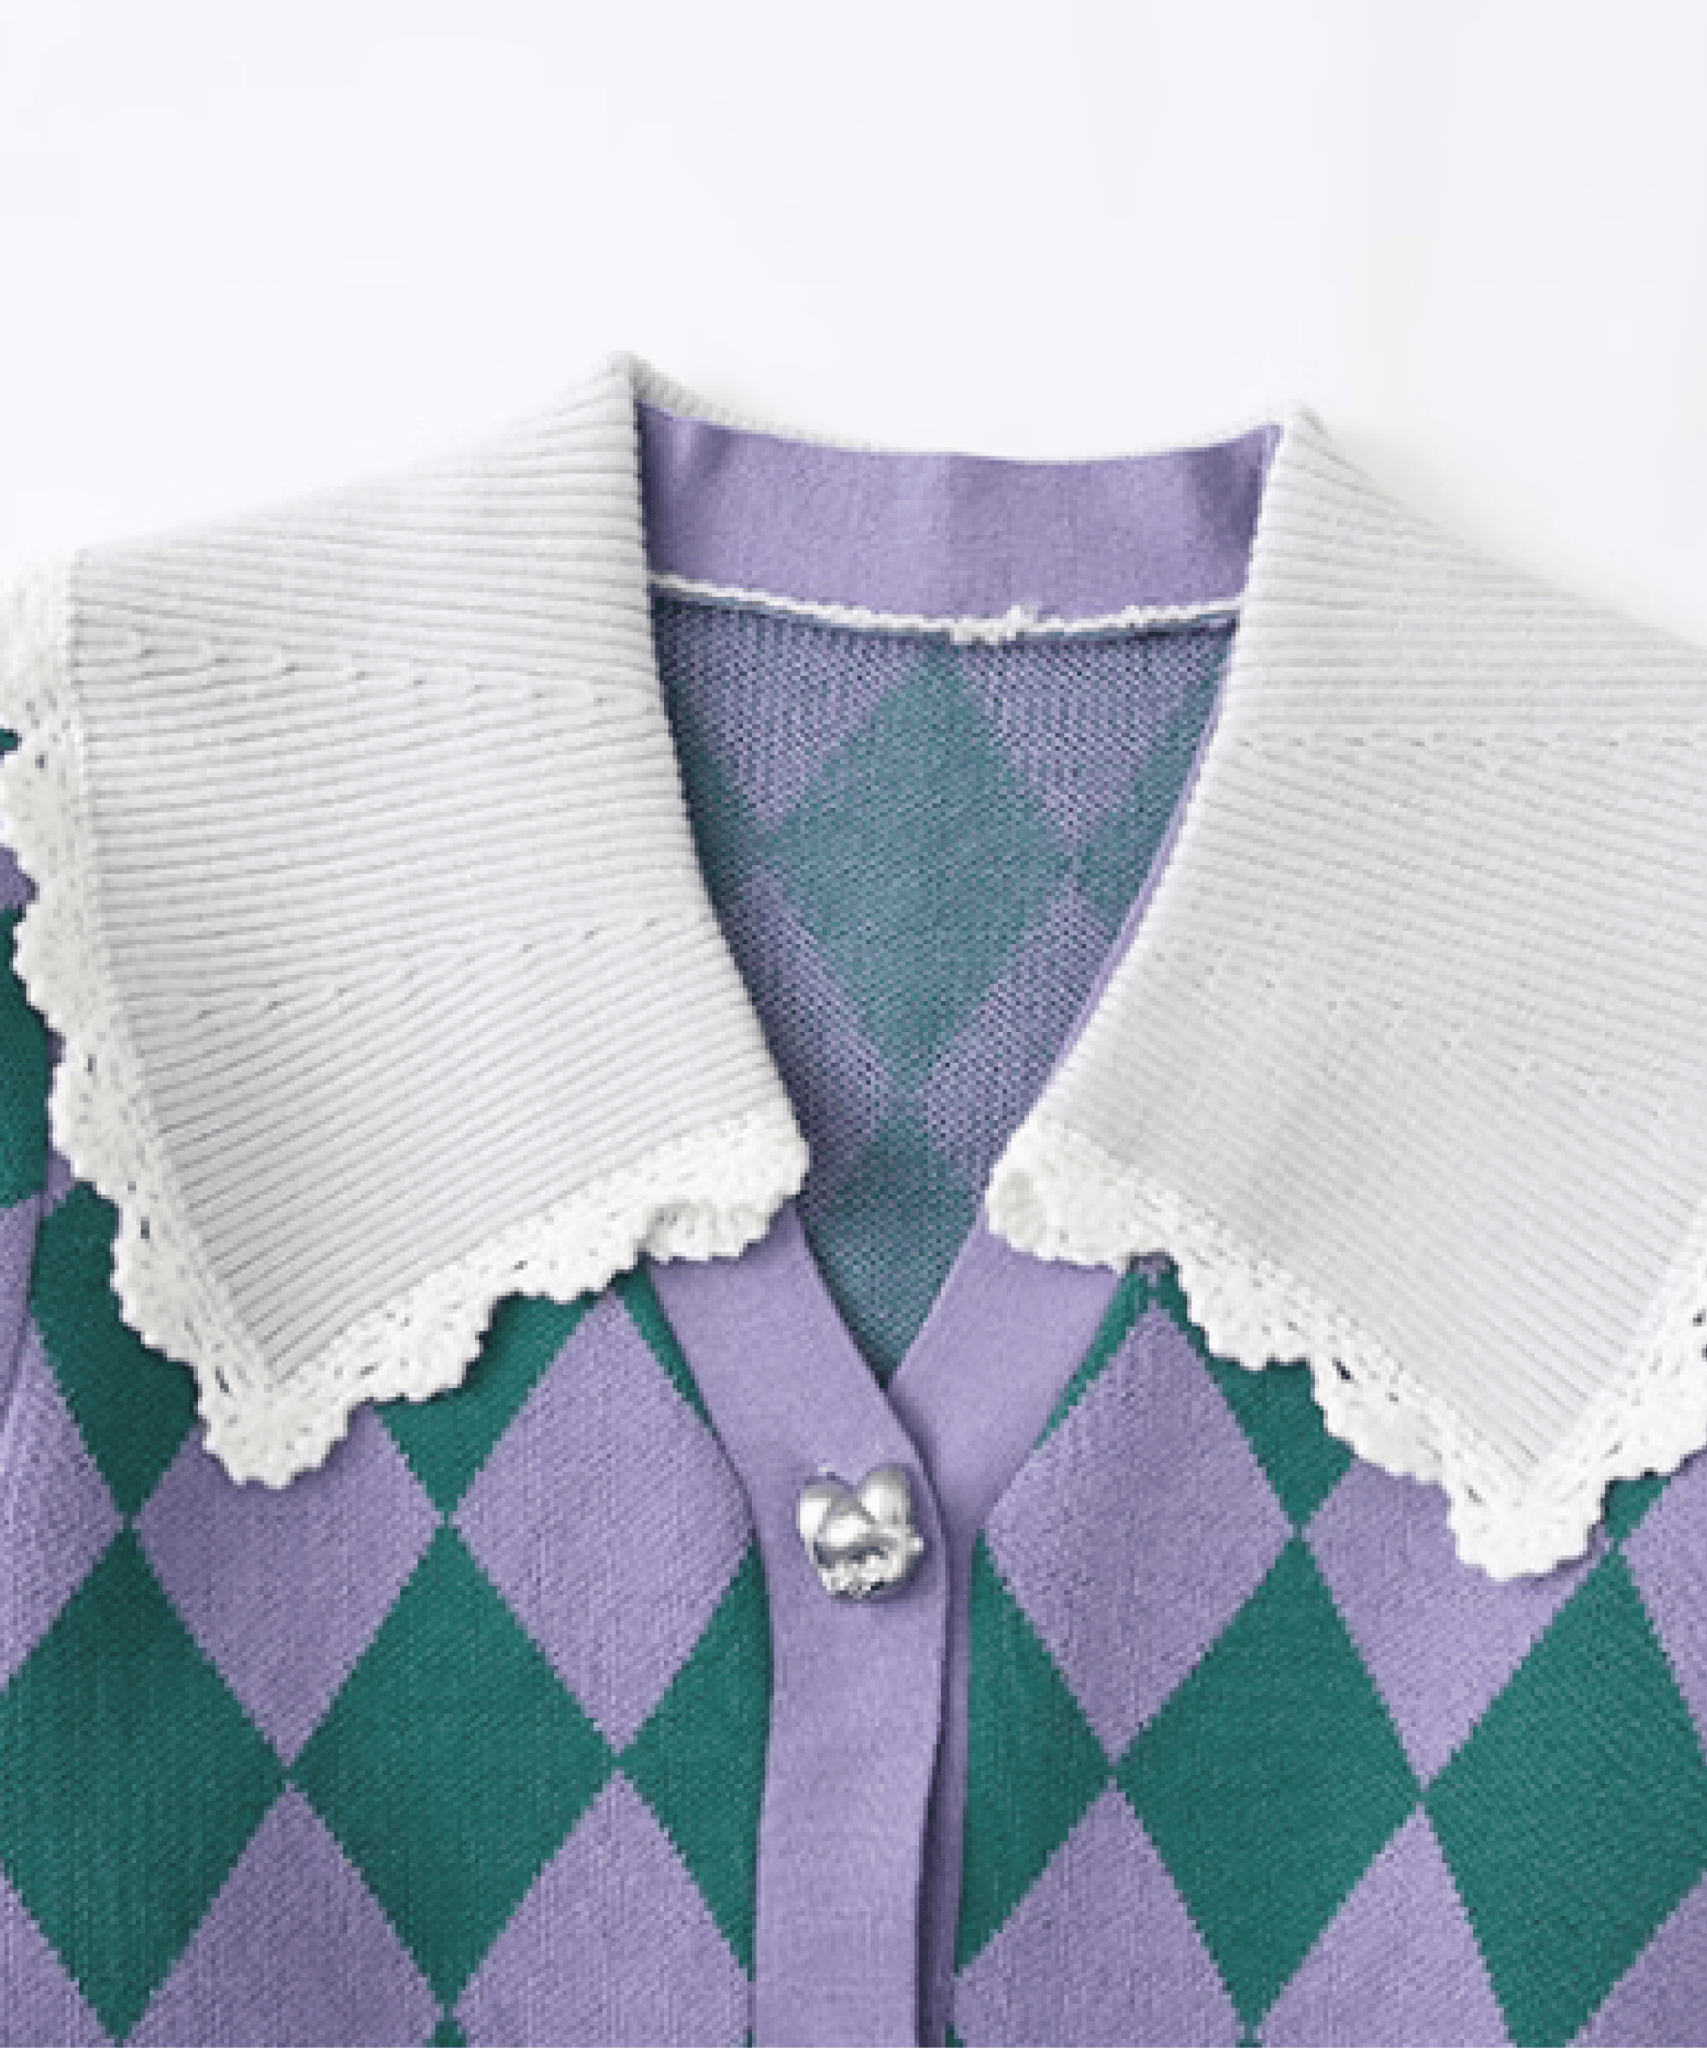 Lace Collar Argyle Knit. レースカラーアーガイルニット - LOVE POMME POMME